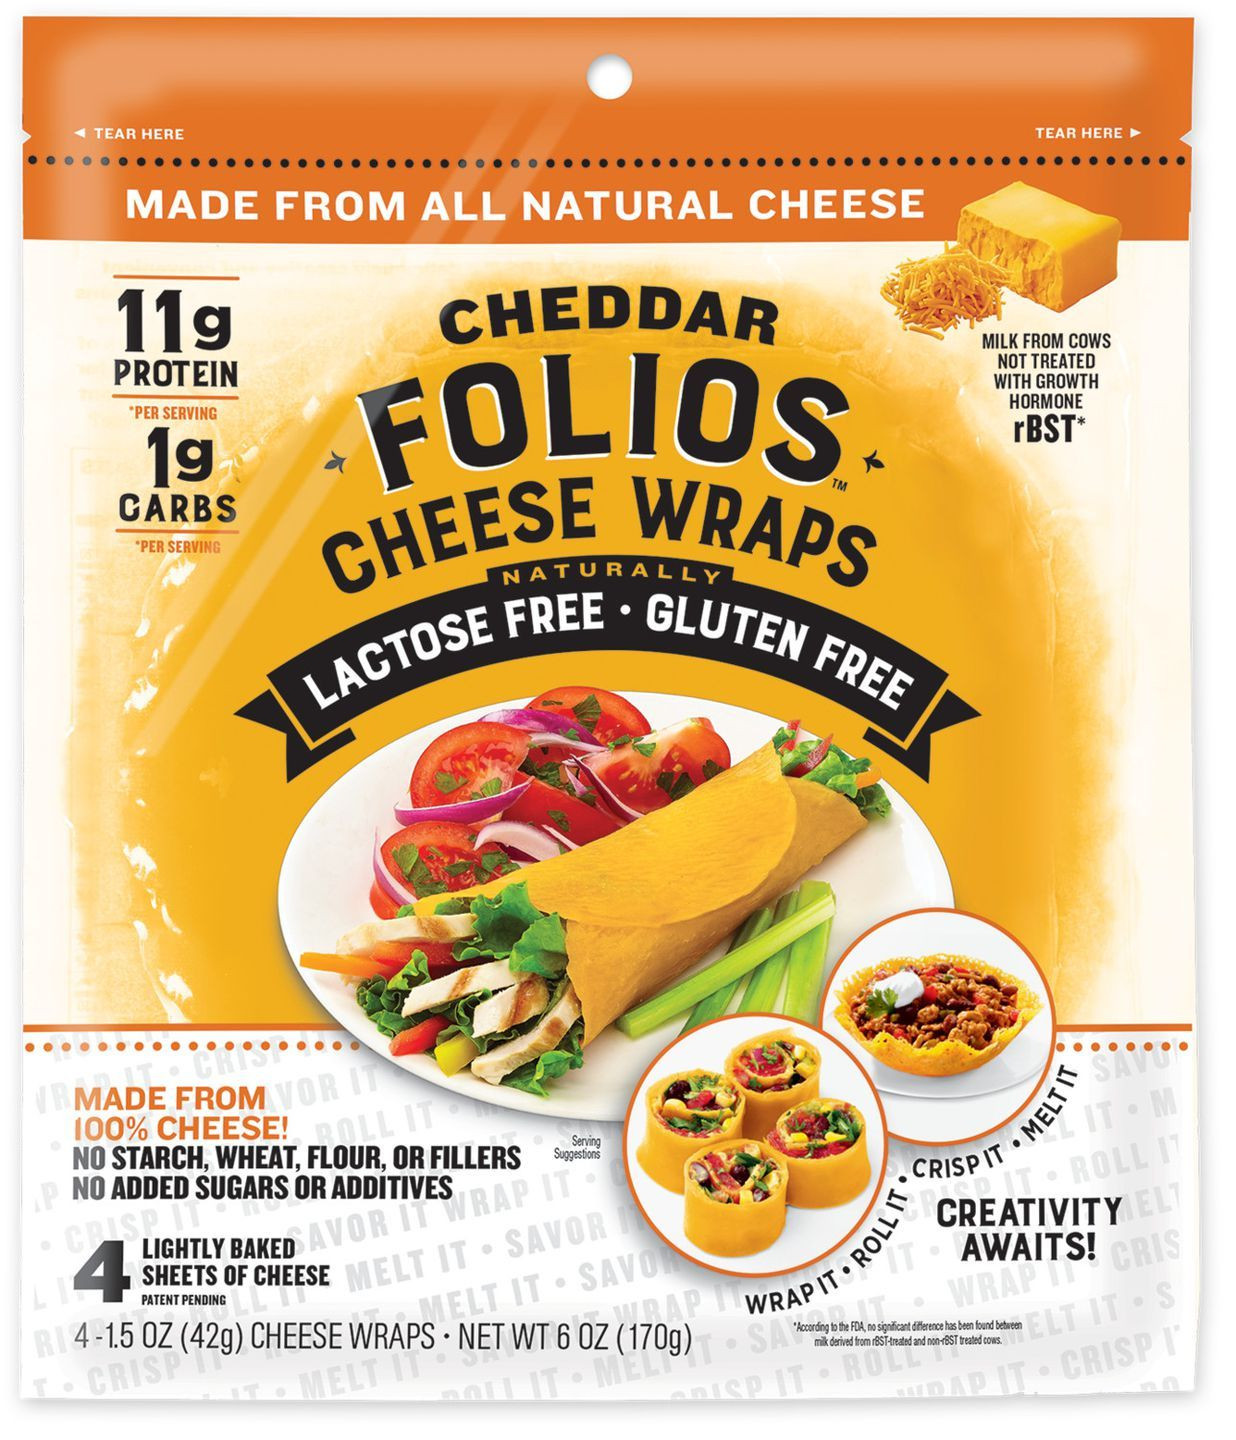 Cheese Wraps Keto Videos
 You Absolutely Need These Cheese Wraps If You’re Trying To